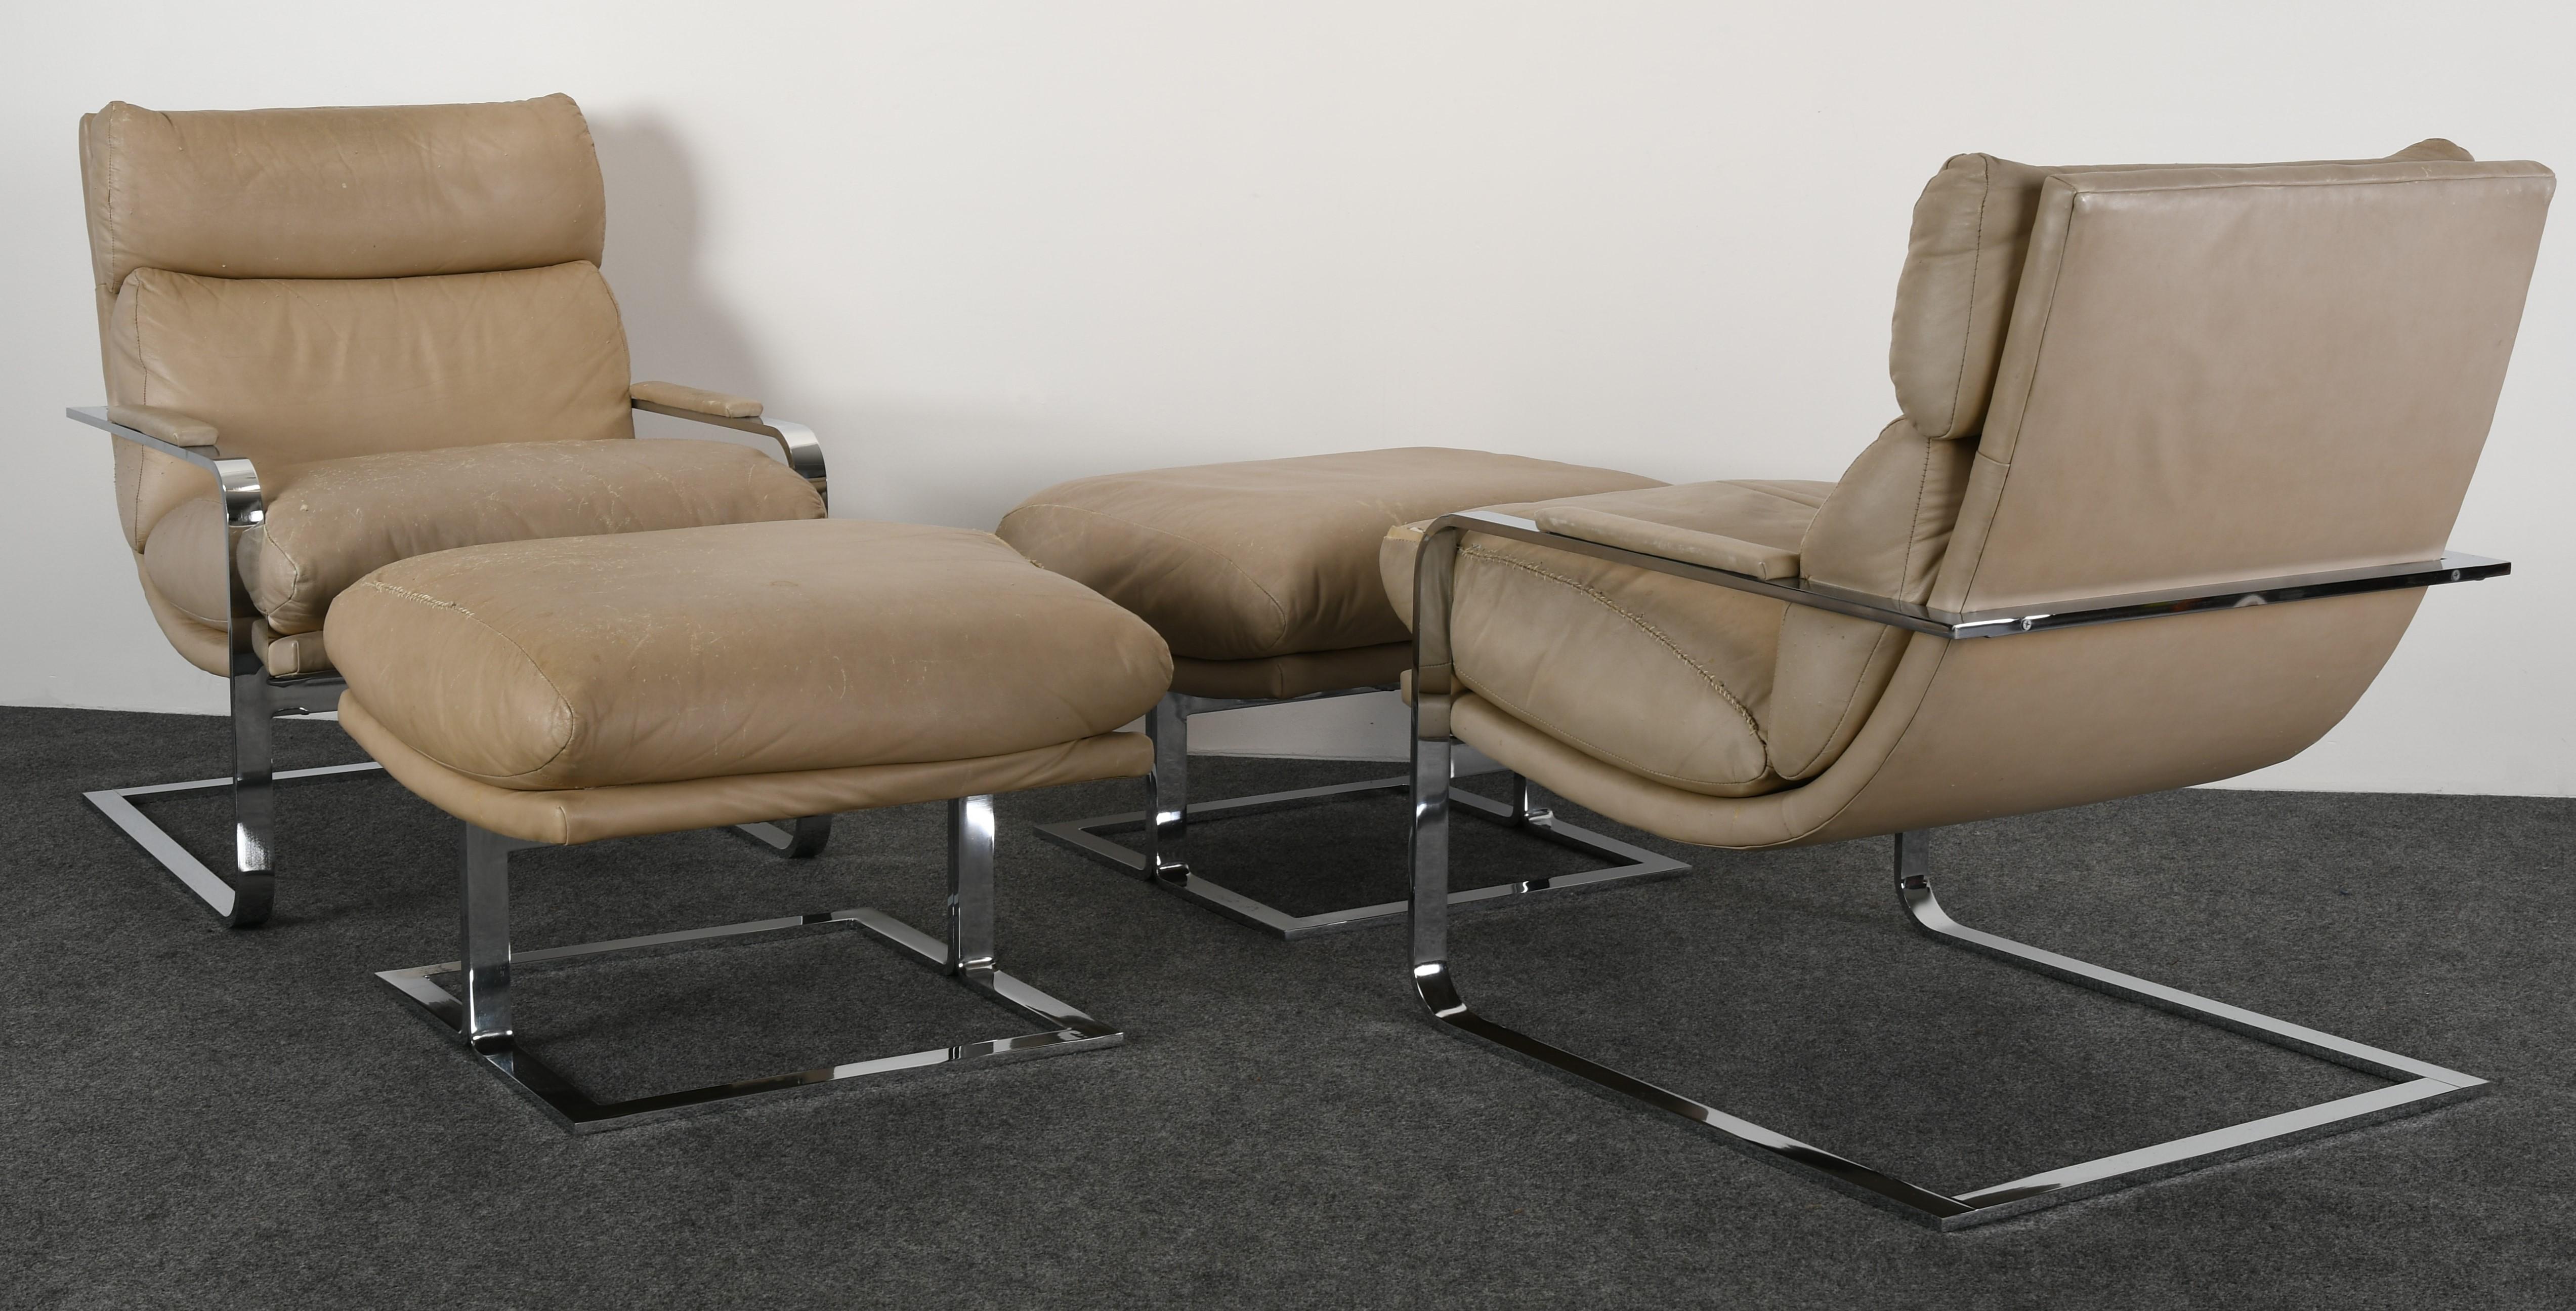 A pair of chic chrome chairs and ottomans by Directional, 1970s. Great frames to reupholster.

Armchair dimensions: 32.5